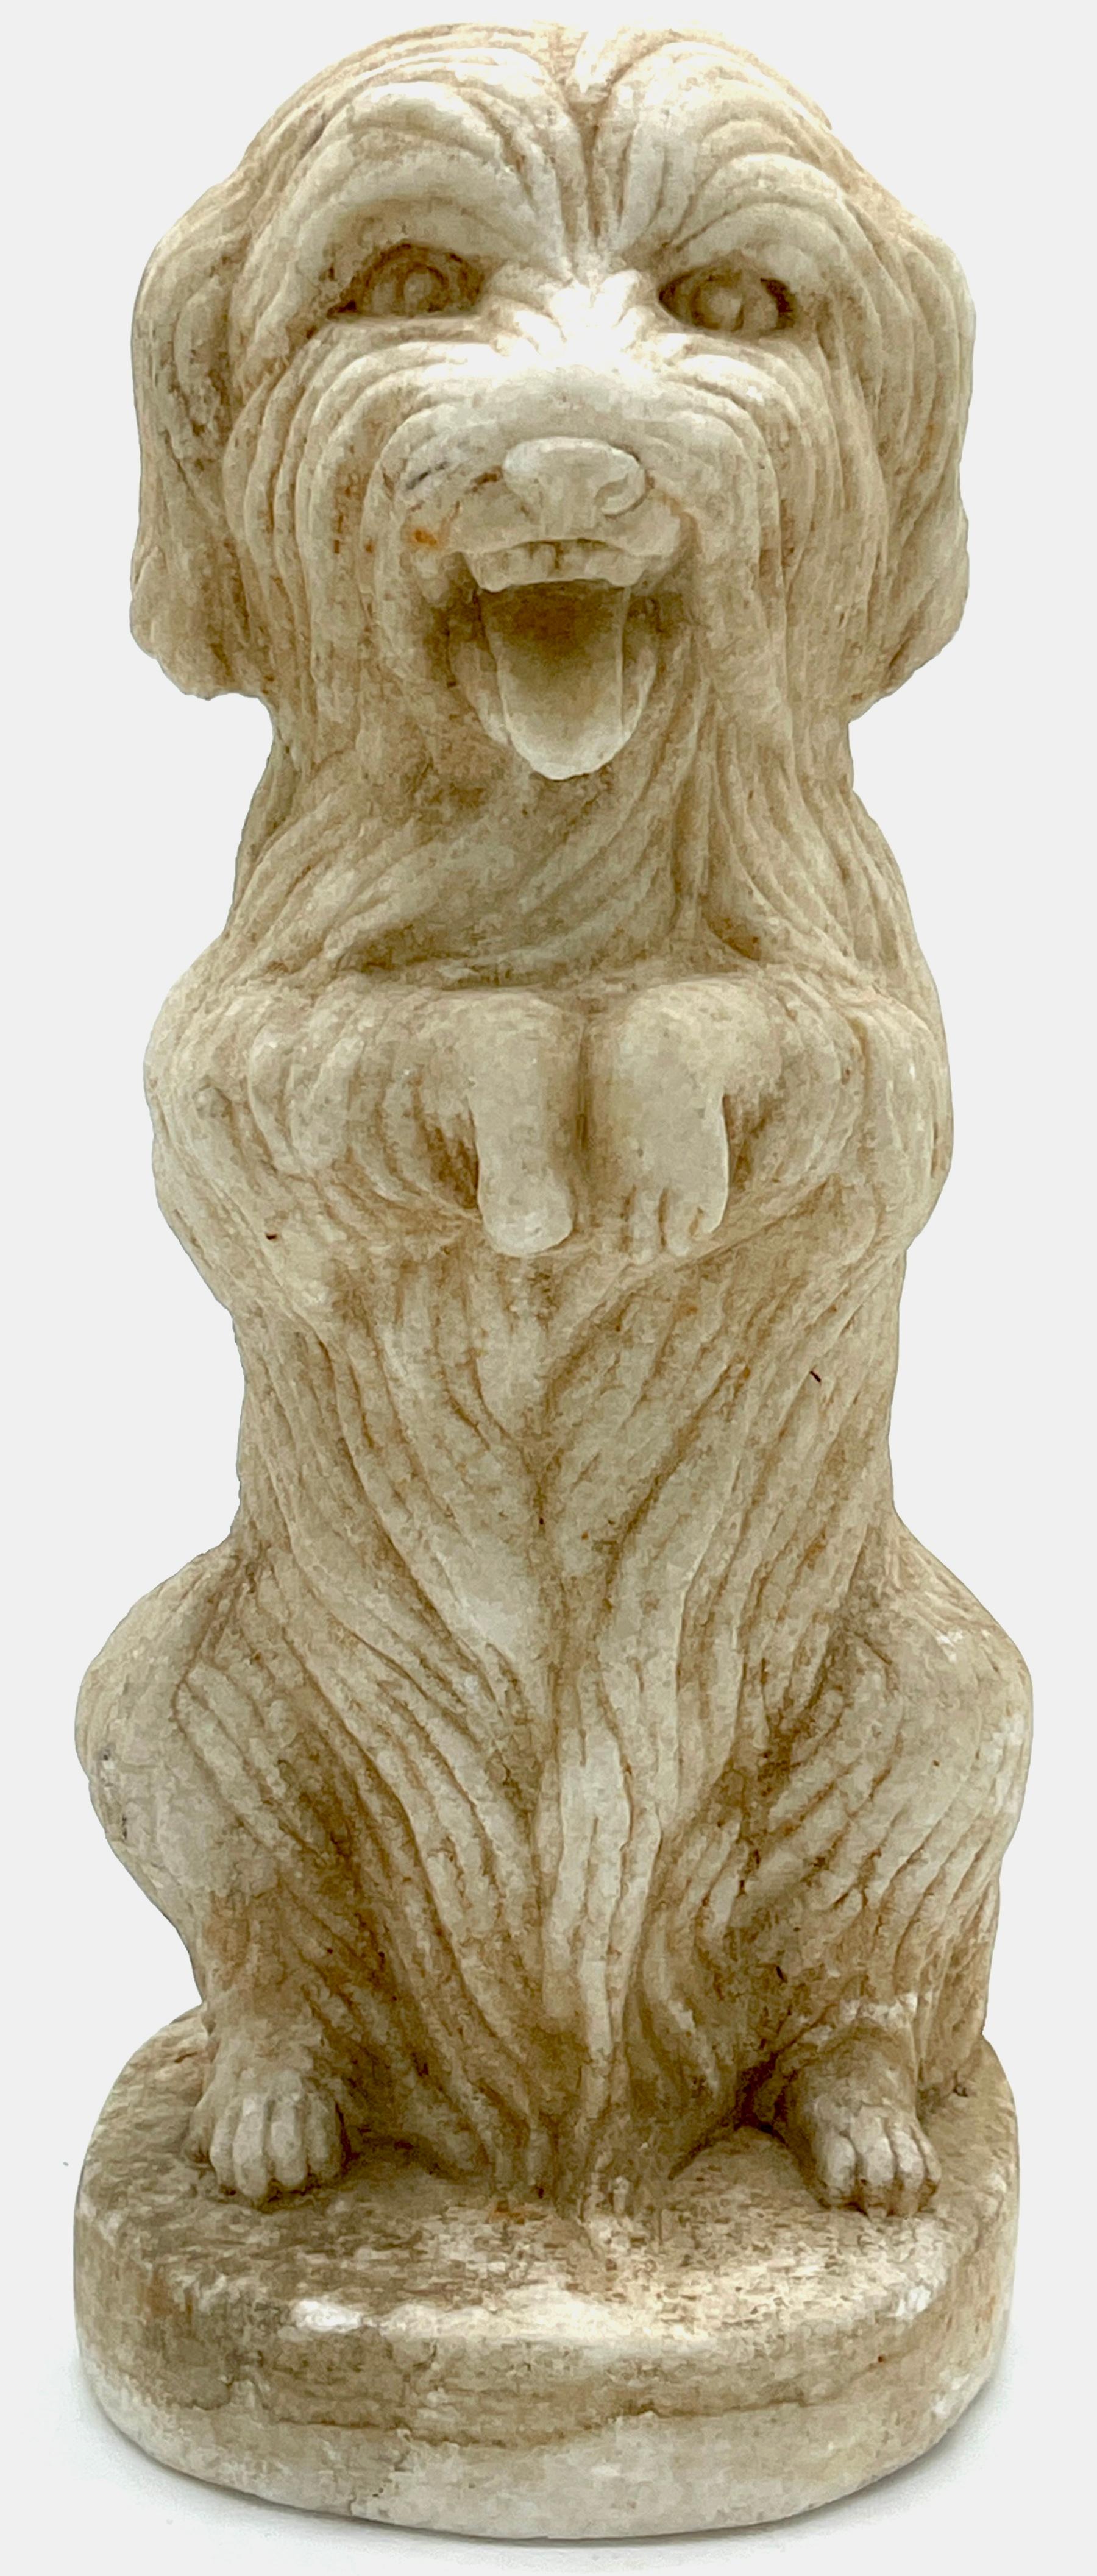 Anglo-Indian Regency Carved Marble Sculpture of a Seated Long-Hair Terrier 
Anglo-Indian for English Market, 19th Century 

A whimsical Anglo-Indian Regency Carved Marble Sculpture of a Seated Long-Hair Terrier, made for the English market during